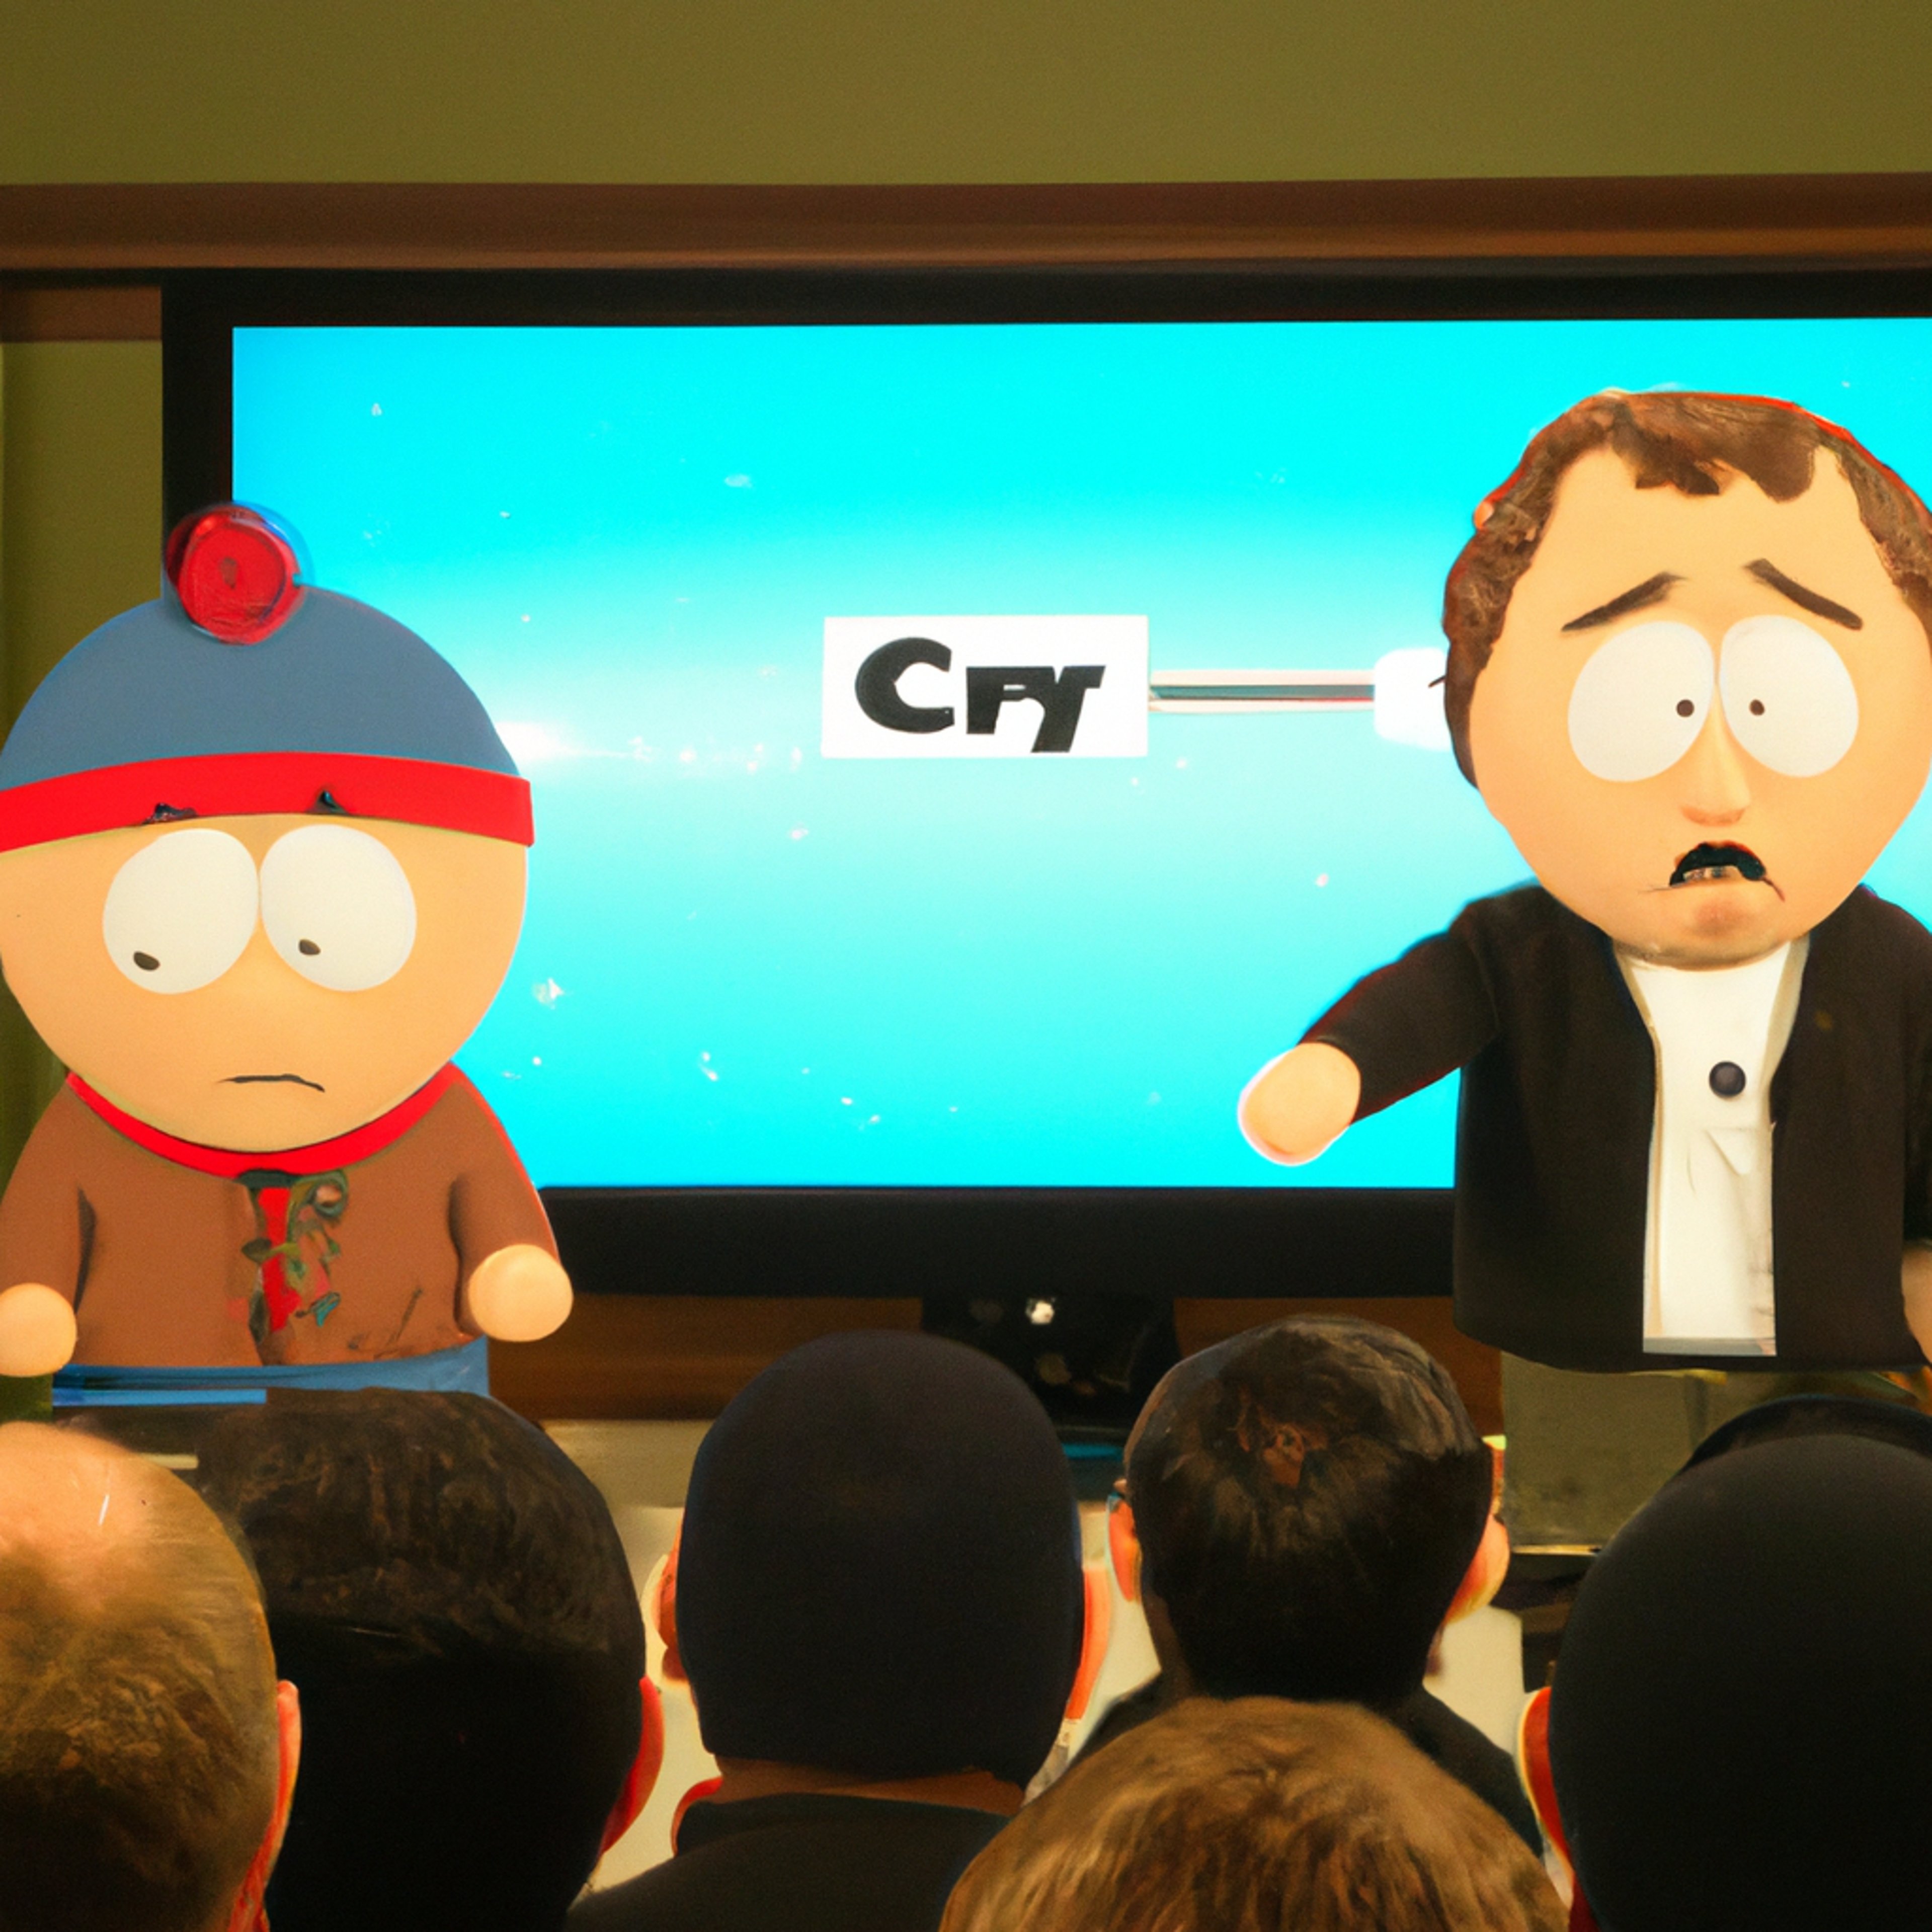 "South Park" Season 26, Episode 6 Airs Tomorrow Night on Comedy Central